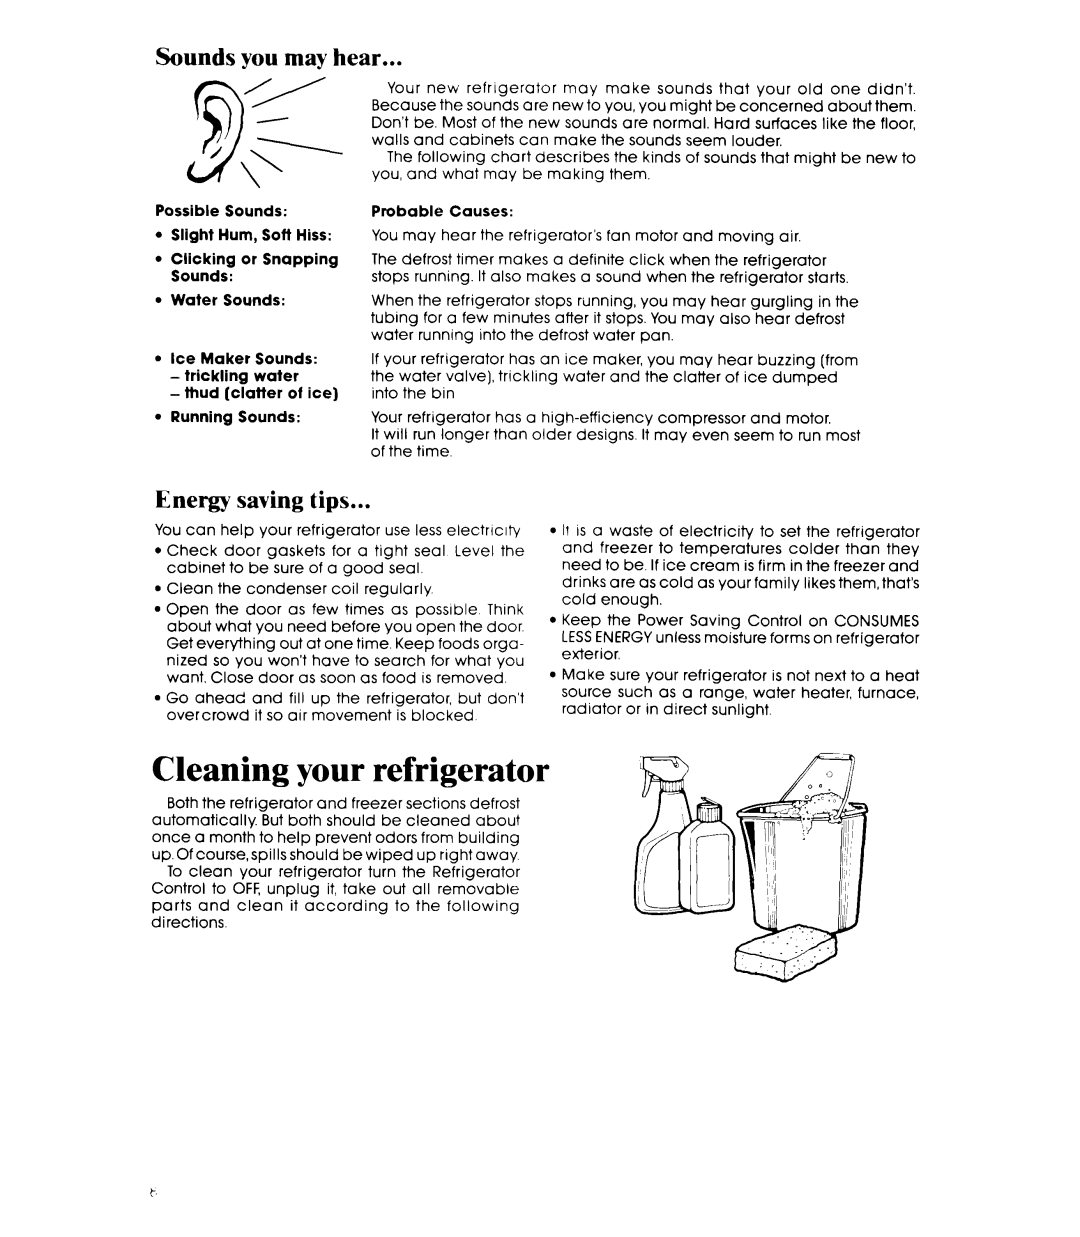 Whirlpool ET20AK manual Cleaning your refrigerator, Sounds you may hear, Energy saving tips, 3’ ,\I 